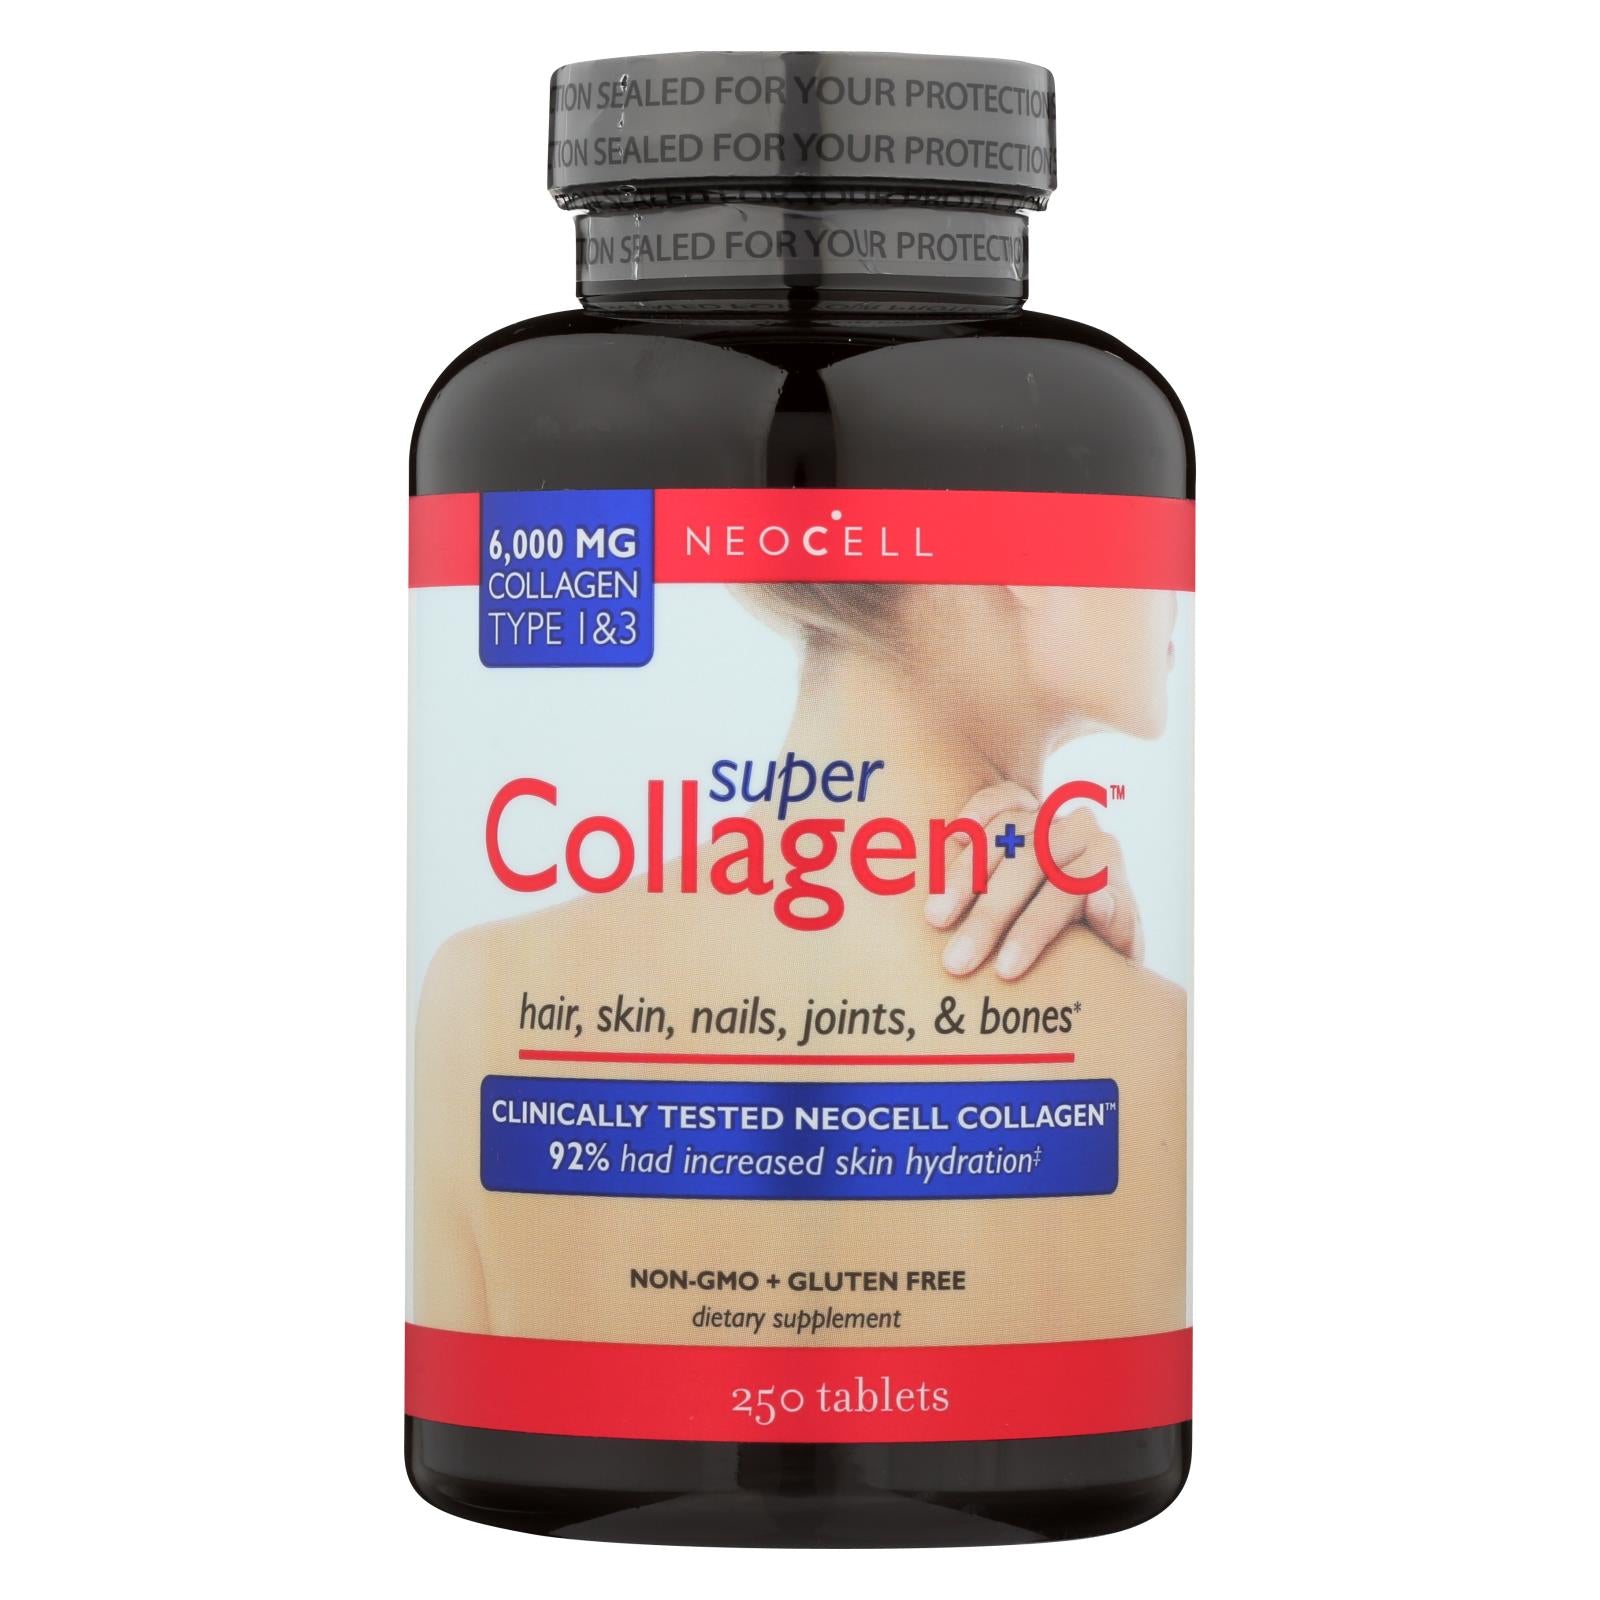 Neocell Super Collagen Plus C Type 1 And 3 - 6000 Mg - 250 Tablets